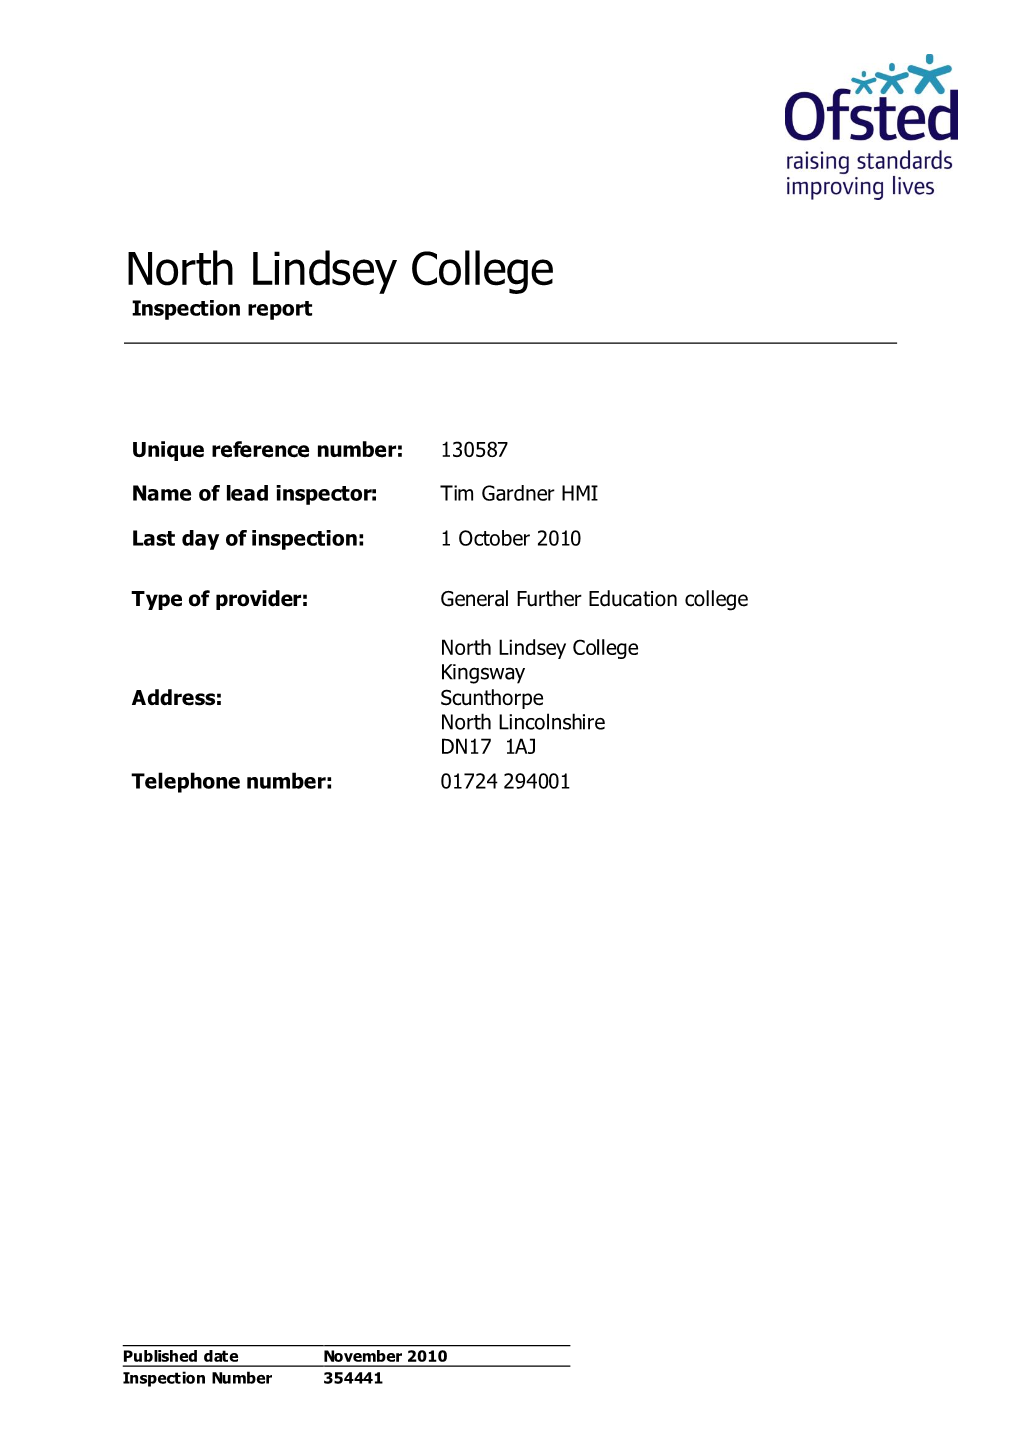 North Lindsey College Inspection Report